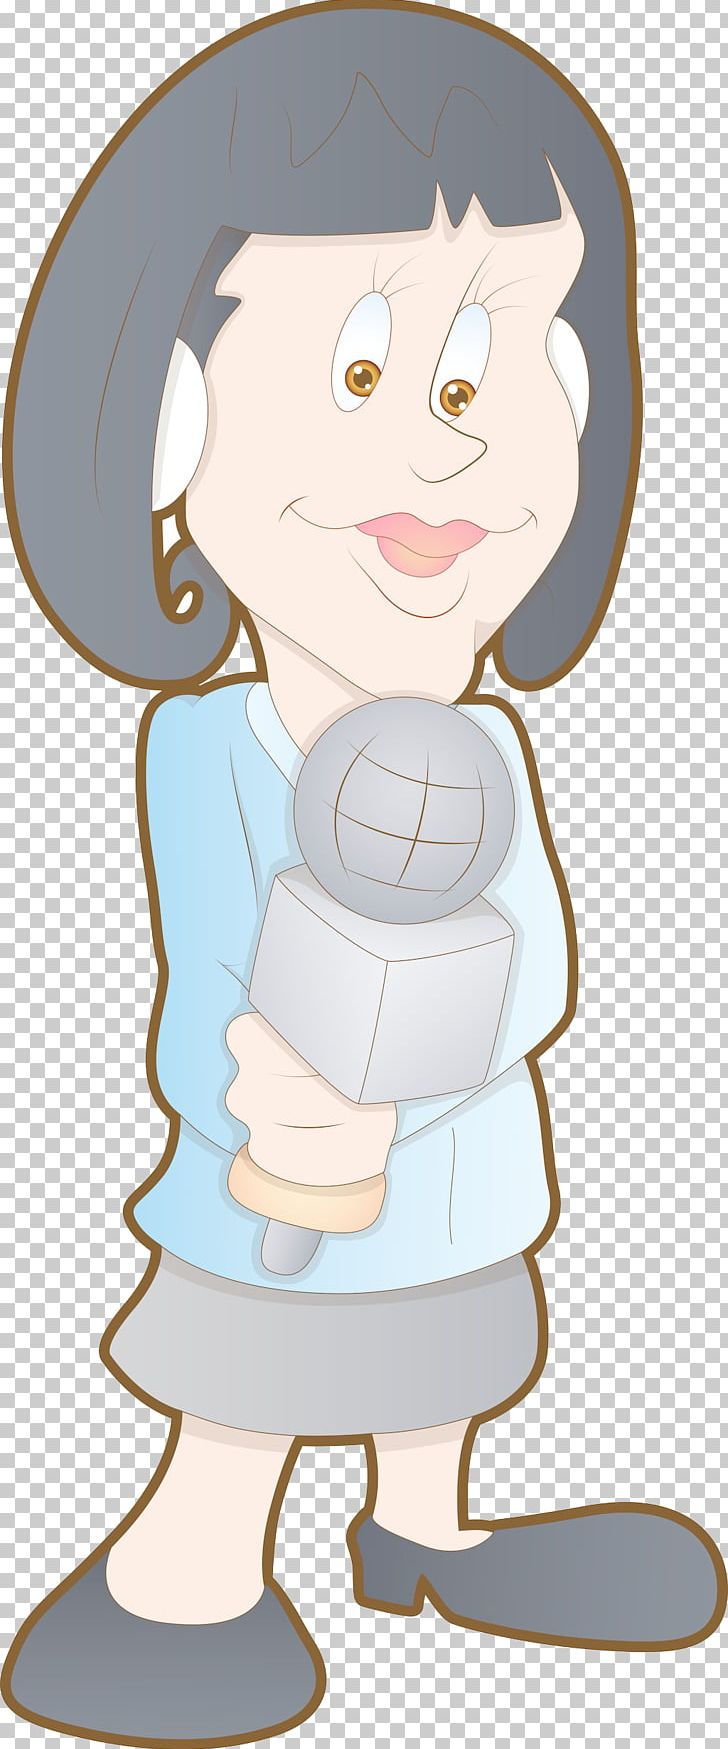 Cartoon Journalist Drawing Photography PNG, Clipart, Anime, Arm, Boy, Business Woman, Cartoon Character Free PNG Download